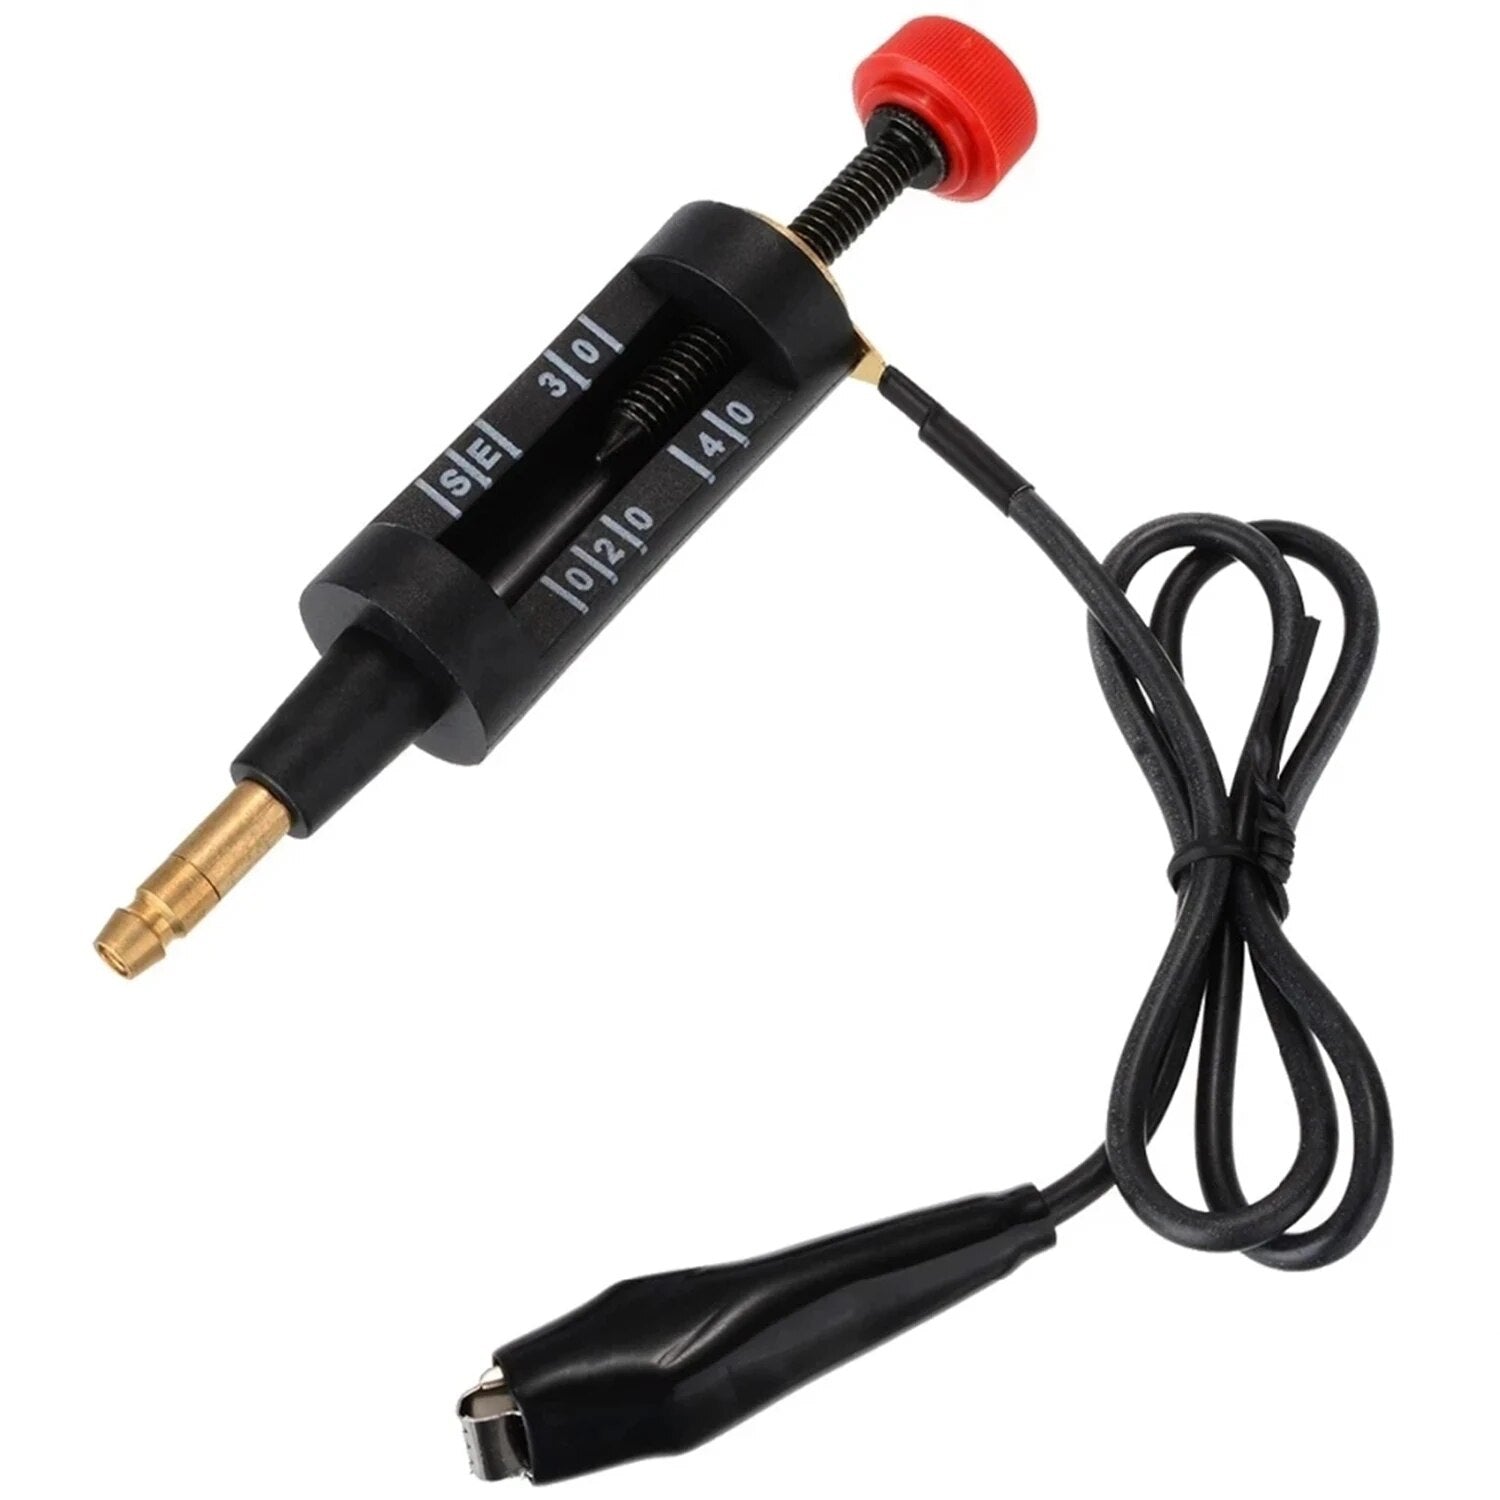 Adjustable Iron Car Spark Plug Tester High Energy Ignition System Coil Discharge Wire Circuit Diagnostic Tool